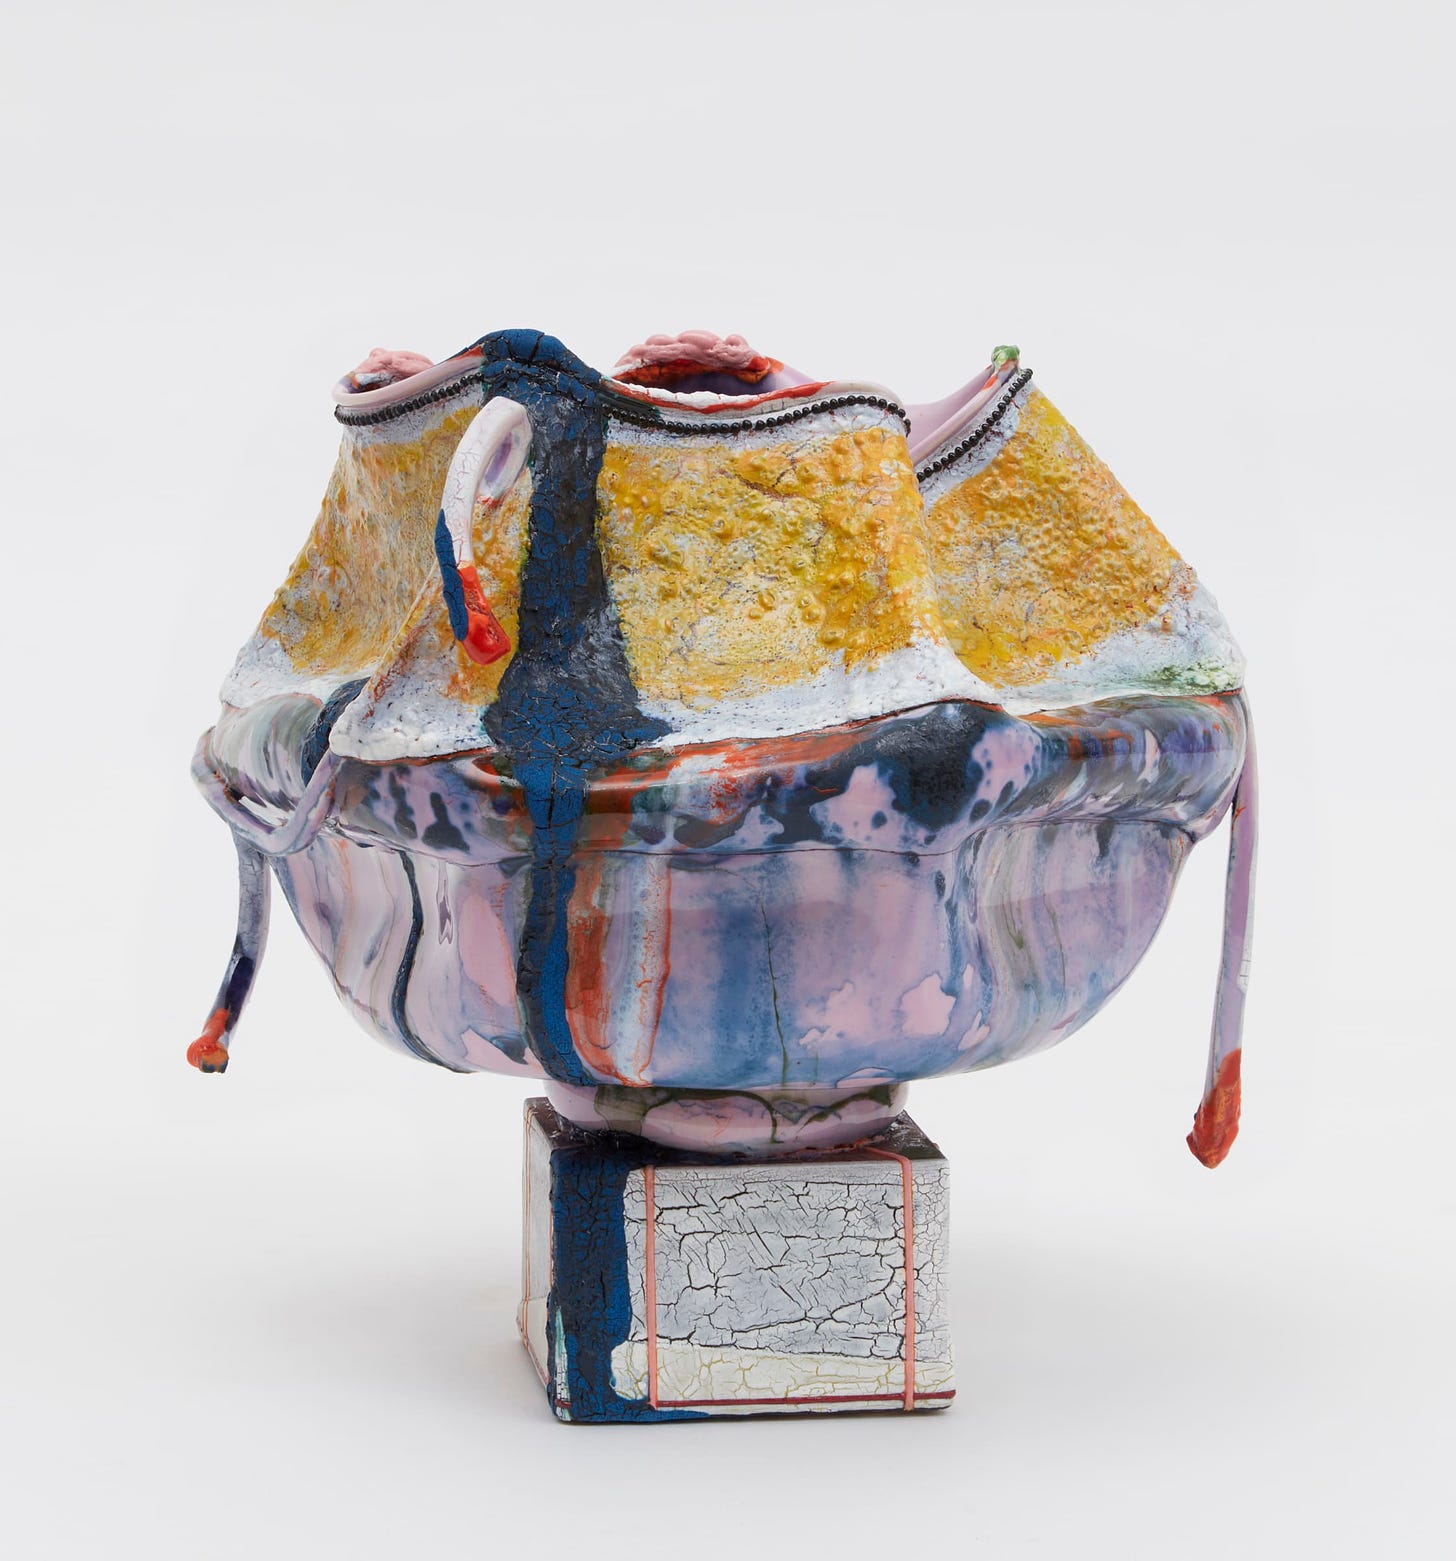 KATHY BUTTERLY, Blue, 2020 | James Cohan Gallery